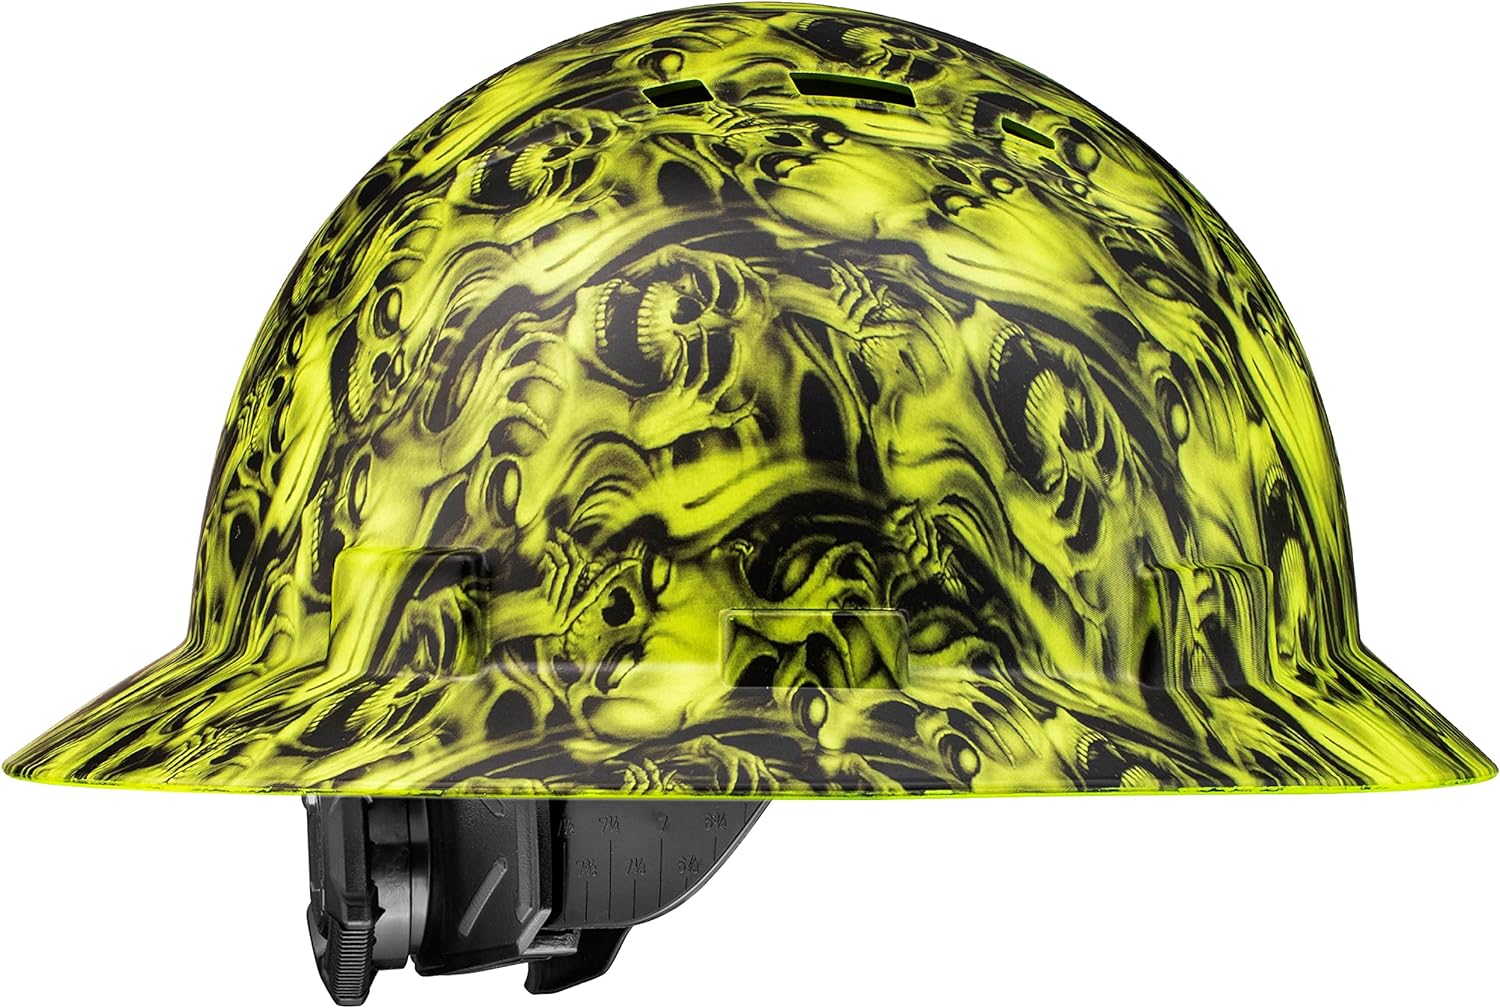 Acerpal Full Brim Hard Hats Customized White Hard Hat, Custom Design Safety Helmet, with 6 Point Suspension, by Acerpal